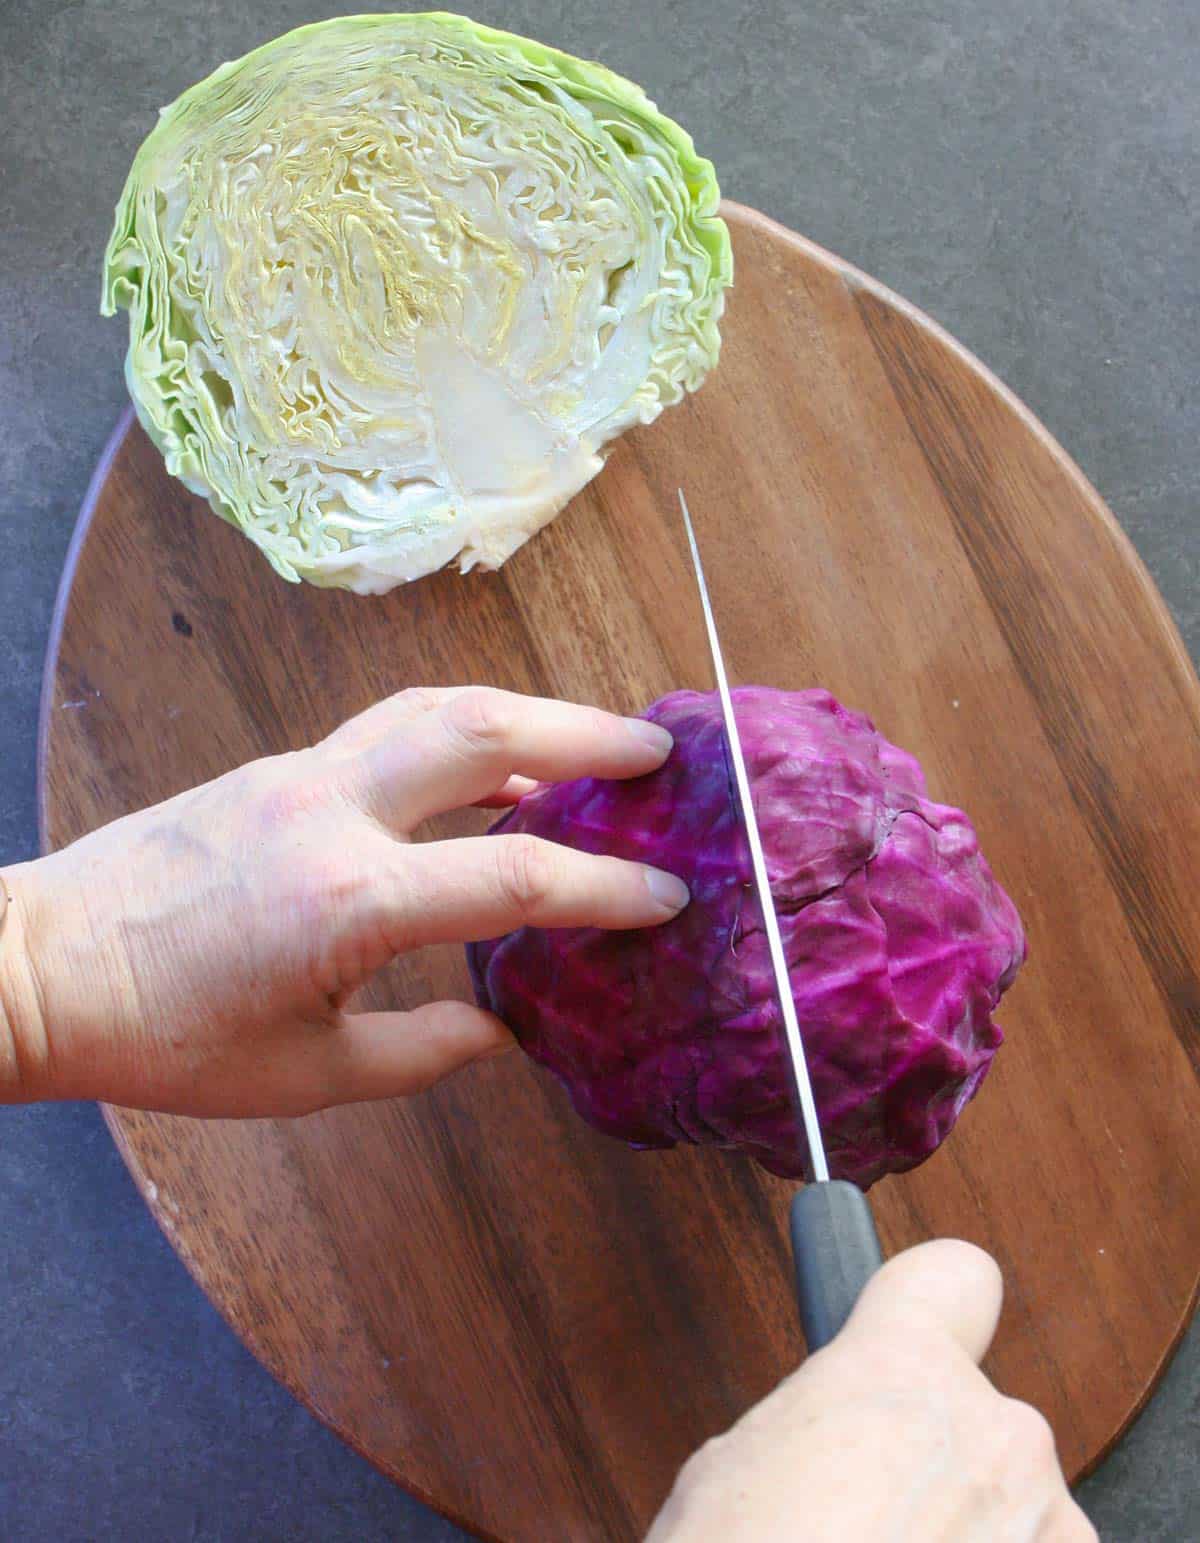 Half a green cabbage on a cutting board with a person cutting a whole red cabbage in half with a knife.